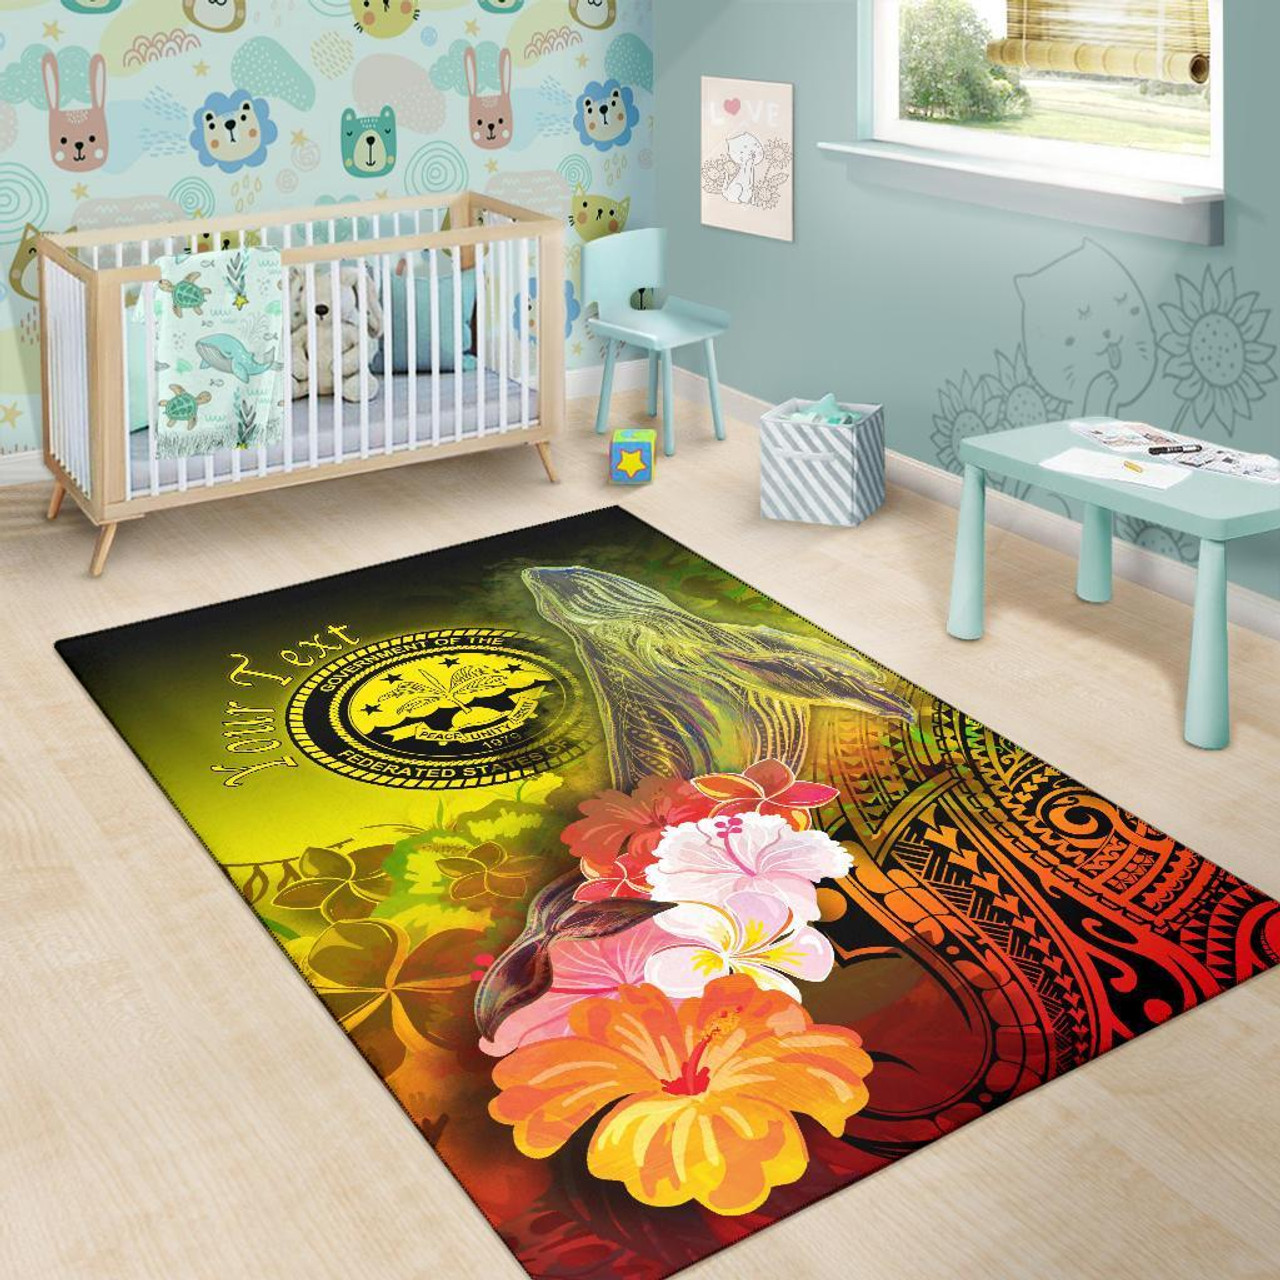 Federated States of Micronesia Custom Personalised Area Rug - Humpback Whale with Tropical Flowers (Yellow) Polynesian 6